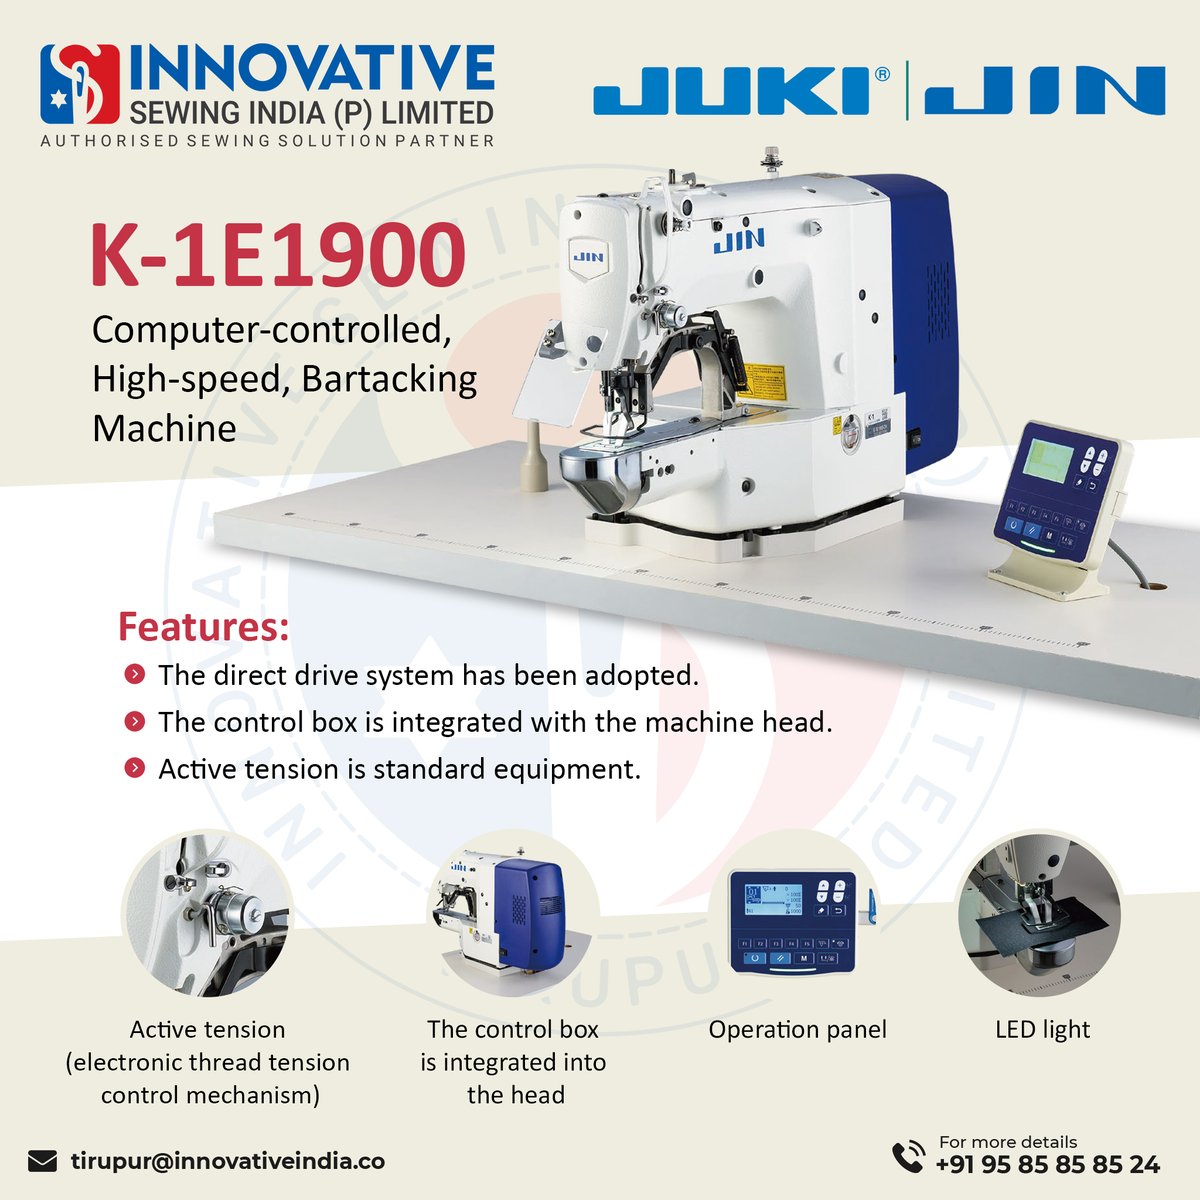 Revolutionize your stitching with the K-1E1900, a computer-controlled, high-speed bartacking machine.

For More Details
📞 +91 95 85 85 85 24
📧 tirupur@innovativeindia.co

#SewingInnovation #K1E1900 #BartackingMachine #CraftingMagic #CreativeStitching #SewingGoals #Innovative